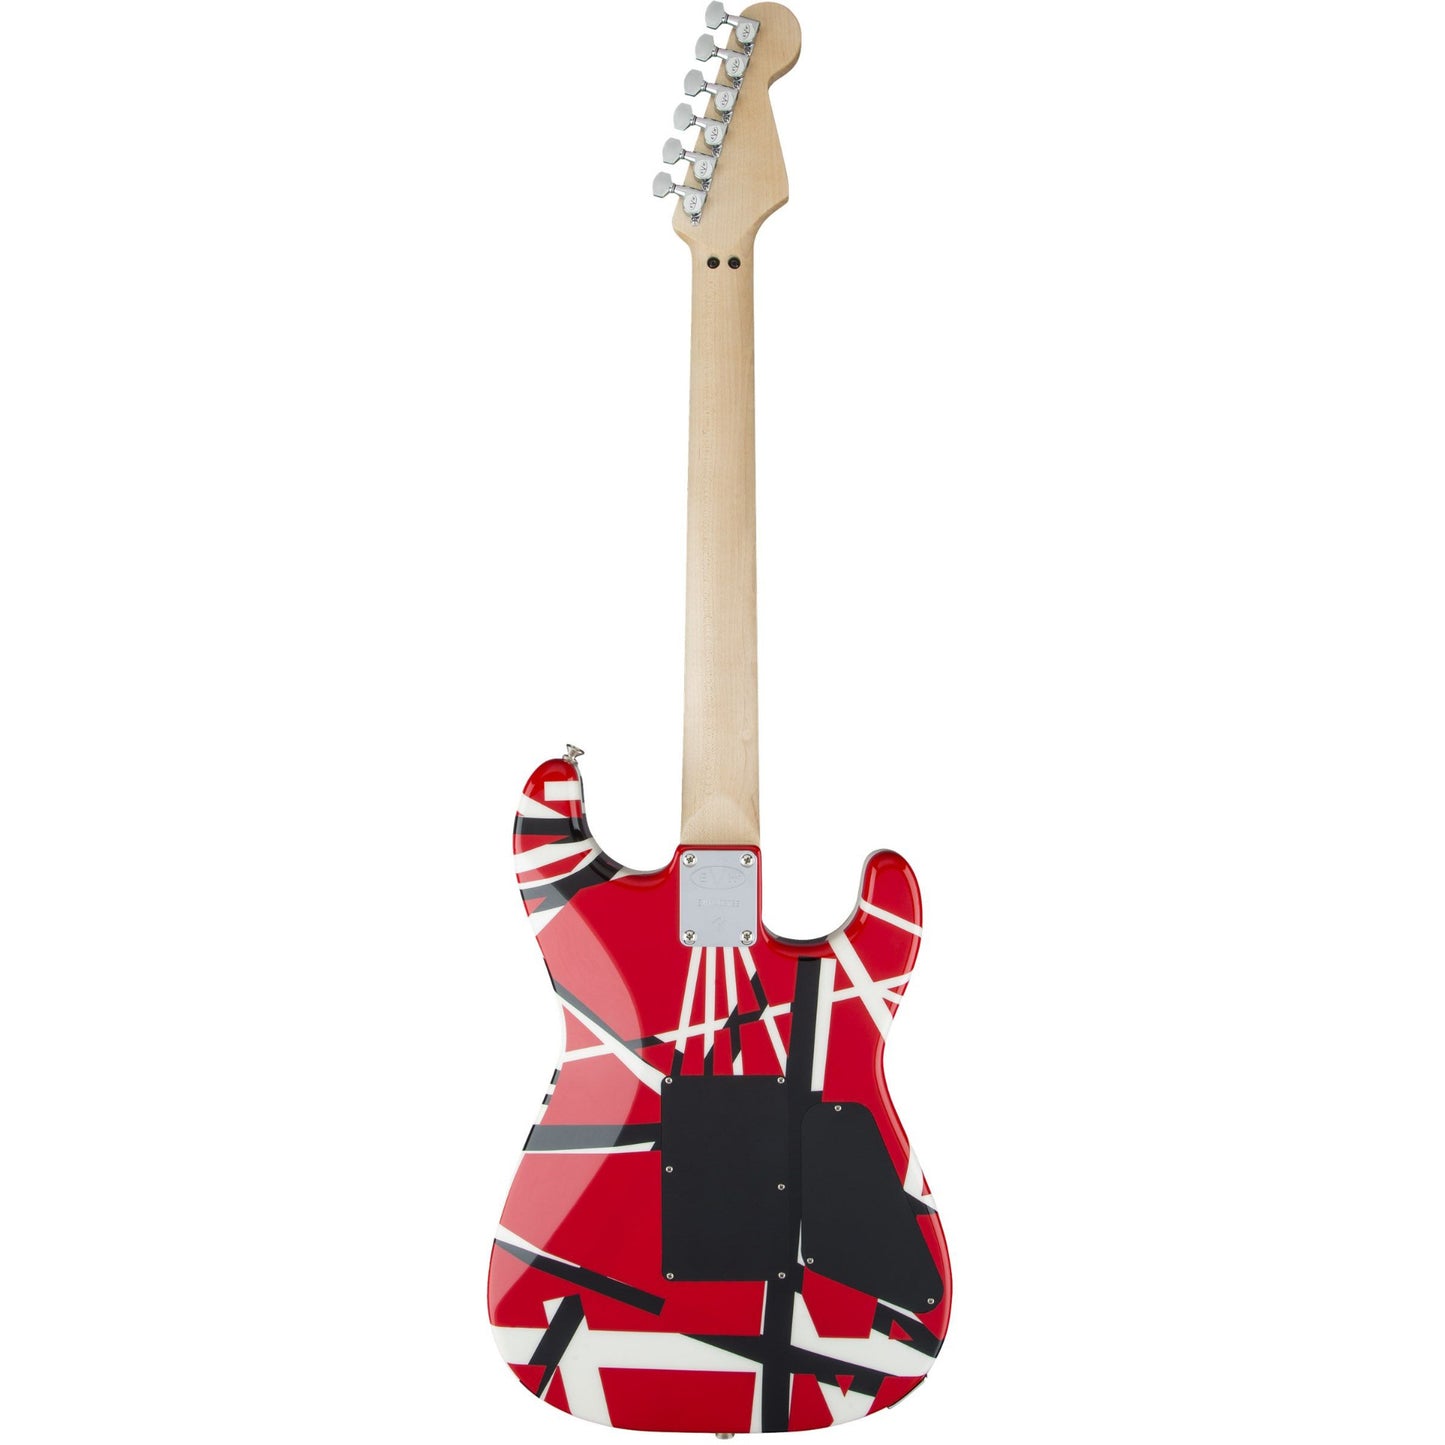 EVH Striped Series Left-Handed Electric Guitar - Red Black and White Stripes